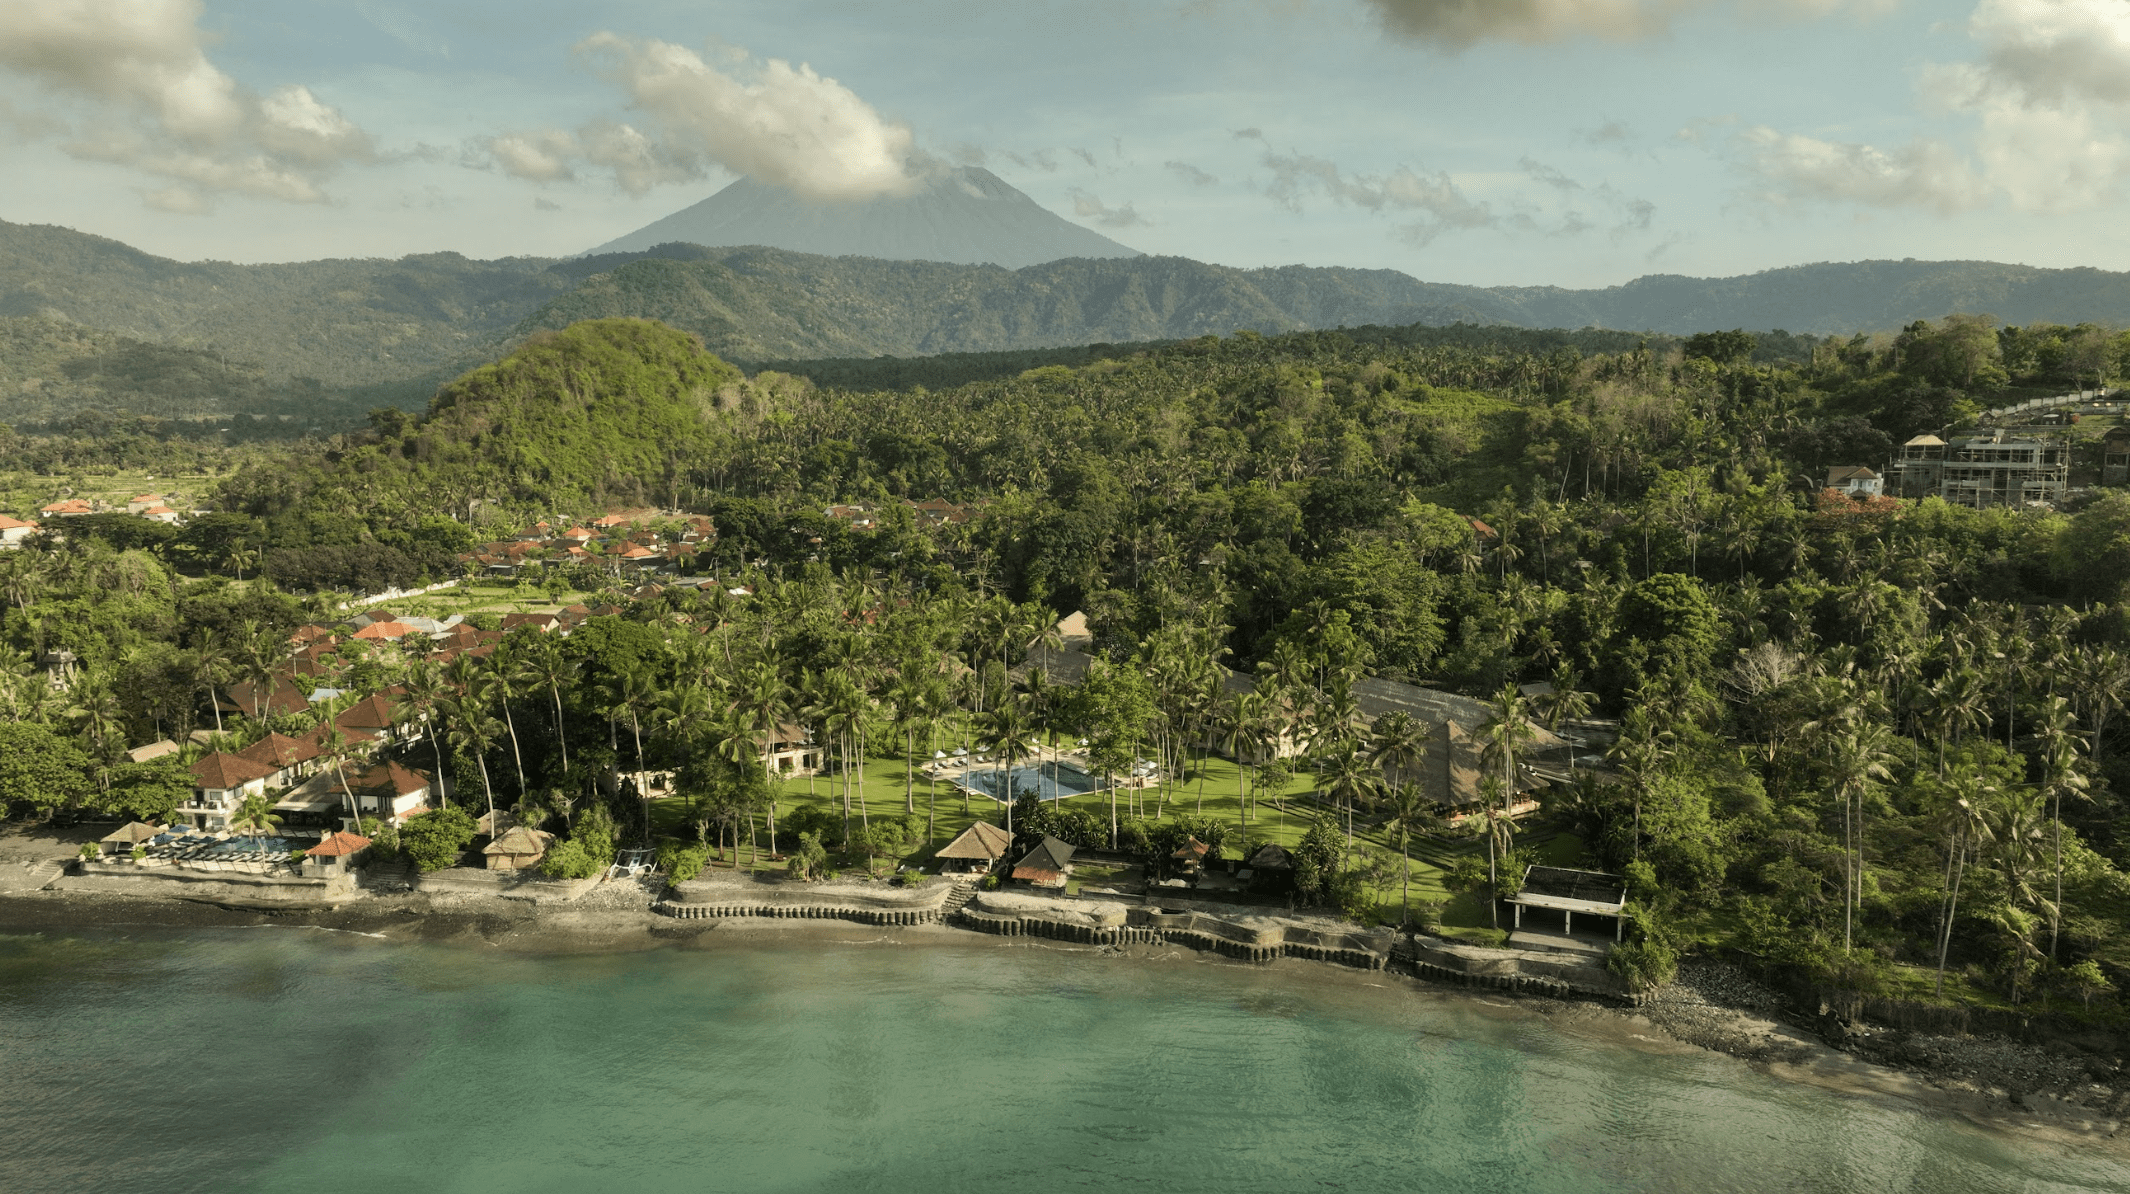 Alila Manggis: Three Decades of Timeless Luxury and Cultural Heritage in East Bali